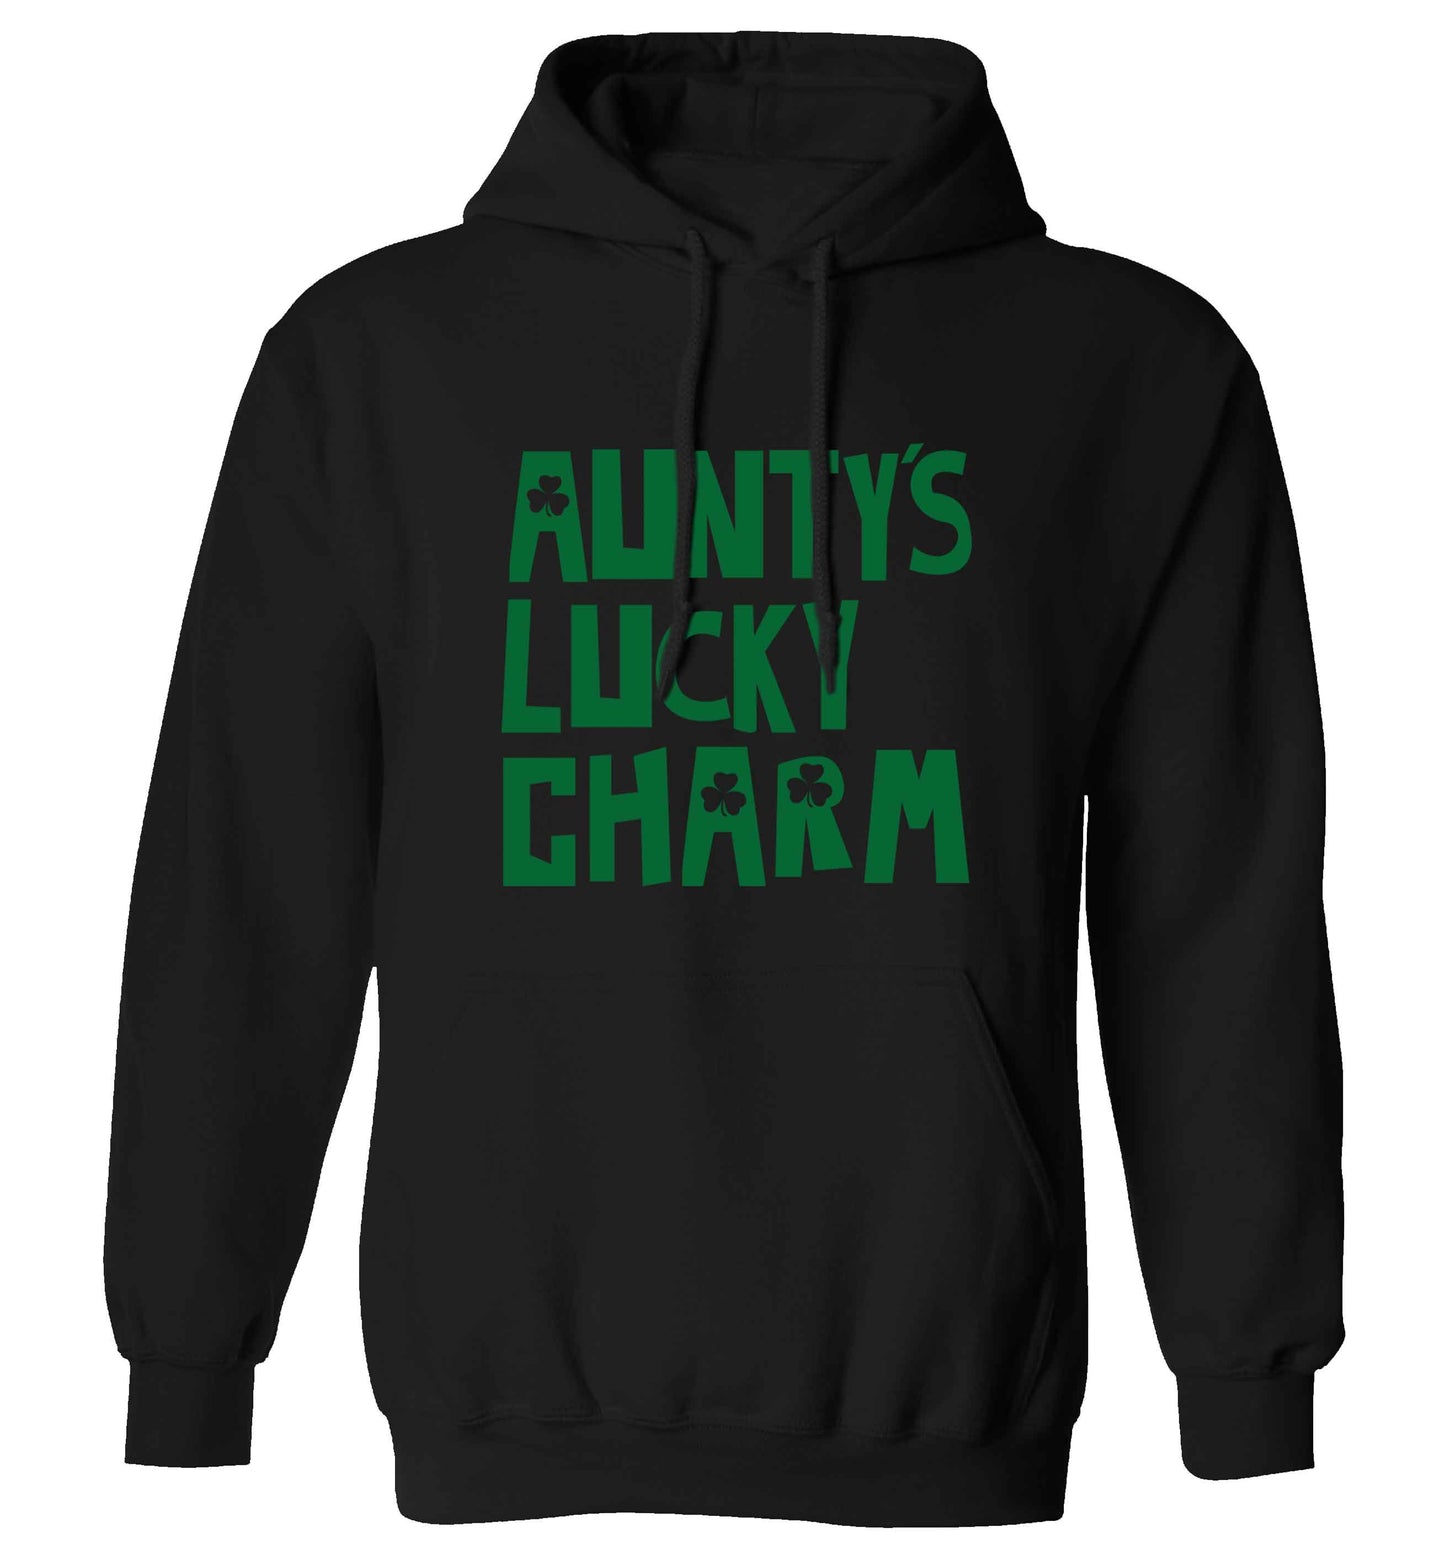 Aunty's lucky charm adults unisex black hoodie 2XL